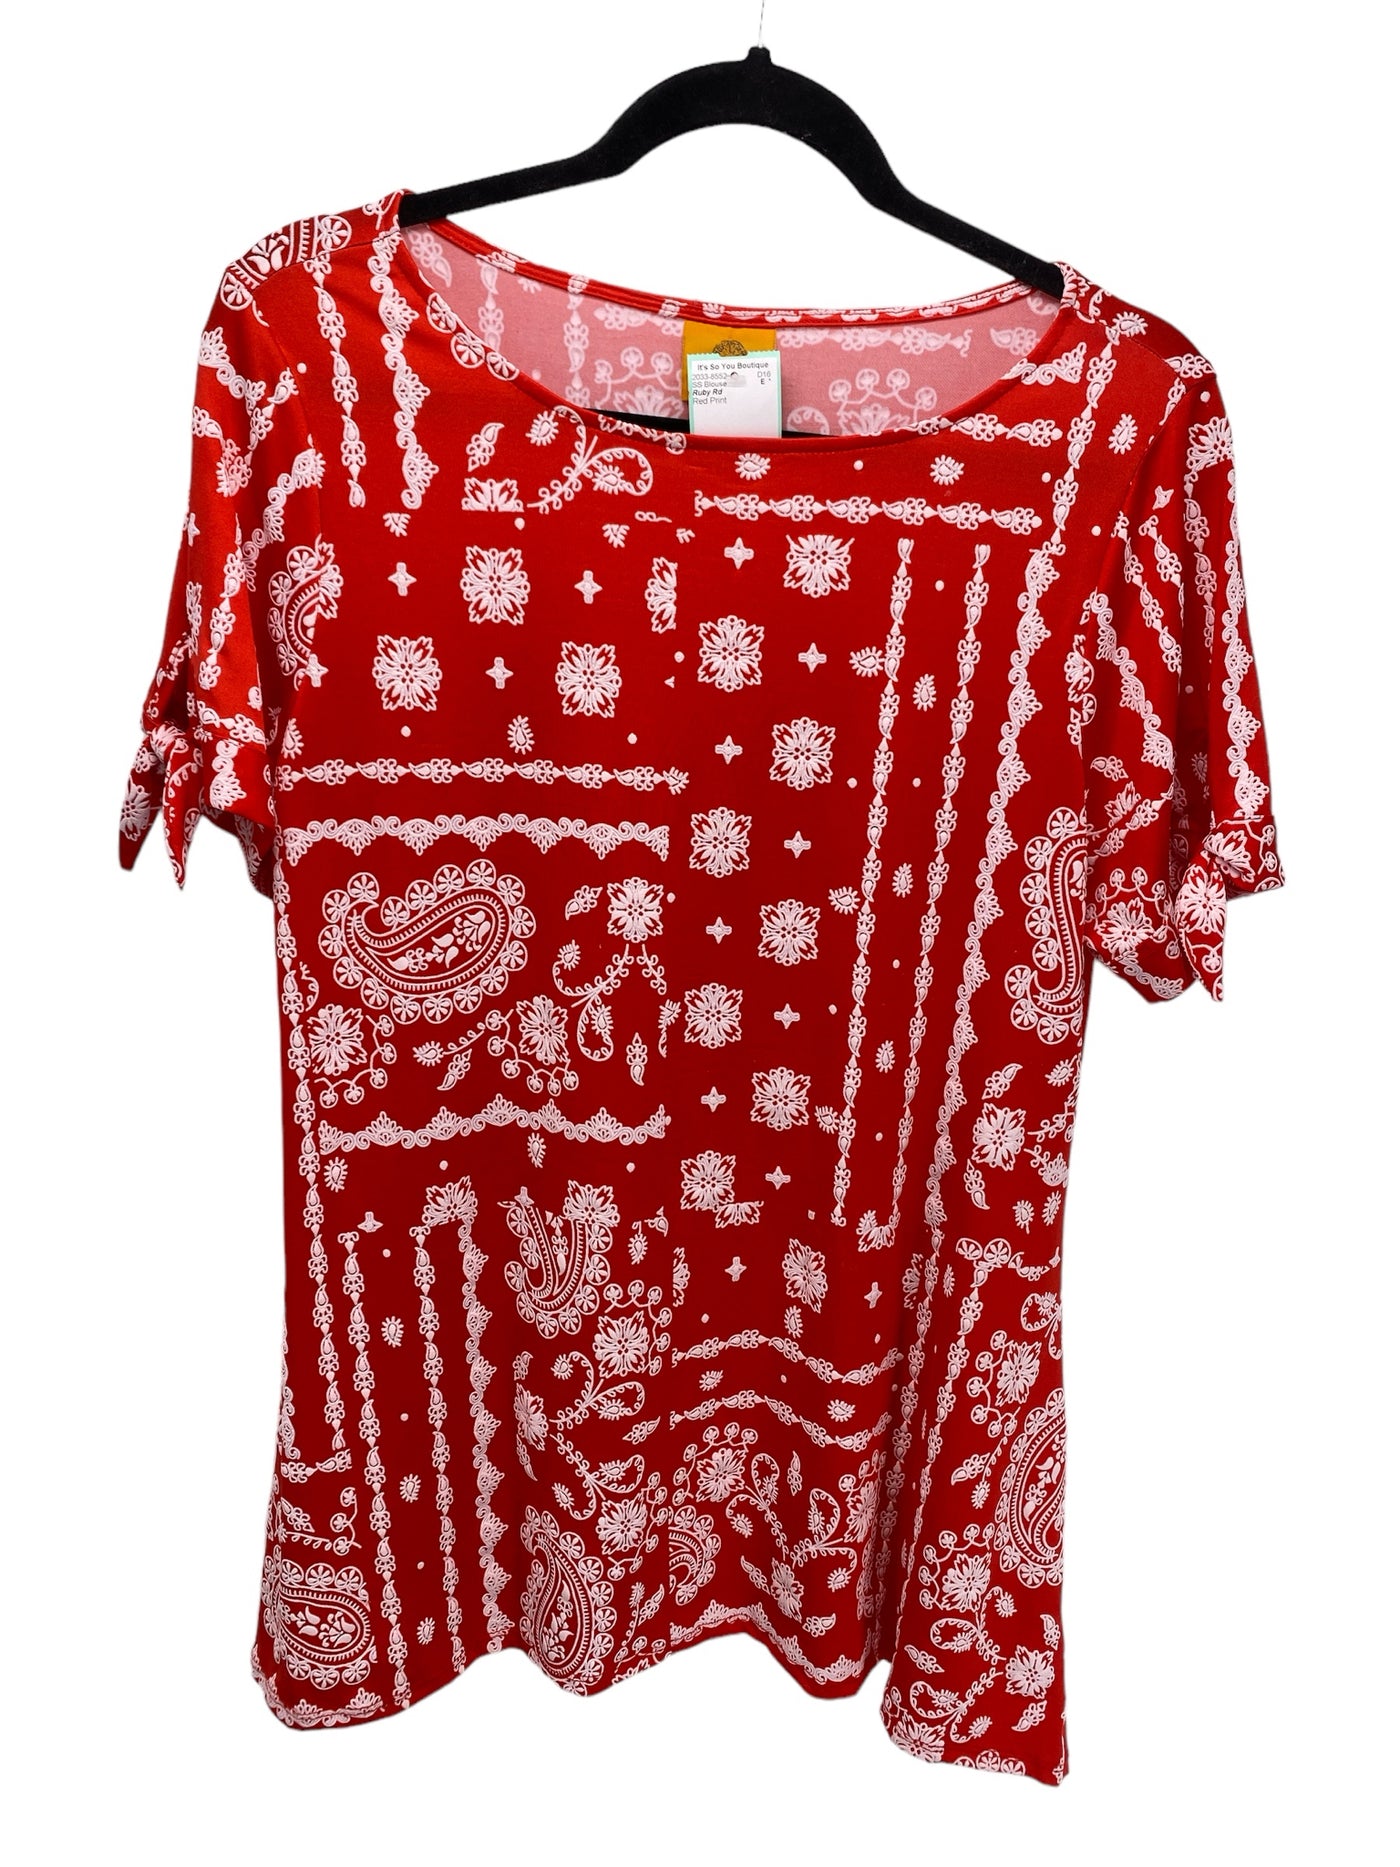 Ruby Rd Misses Size Medium Red Print SS Blouse